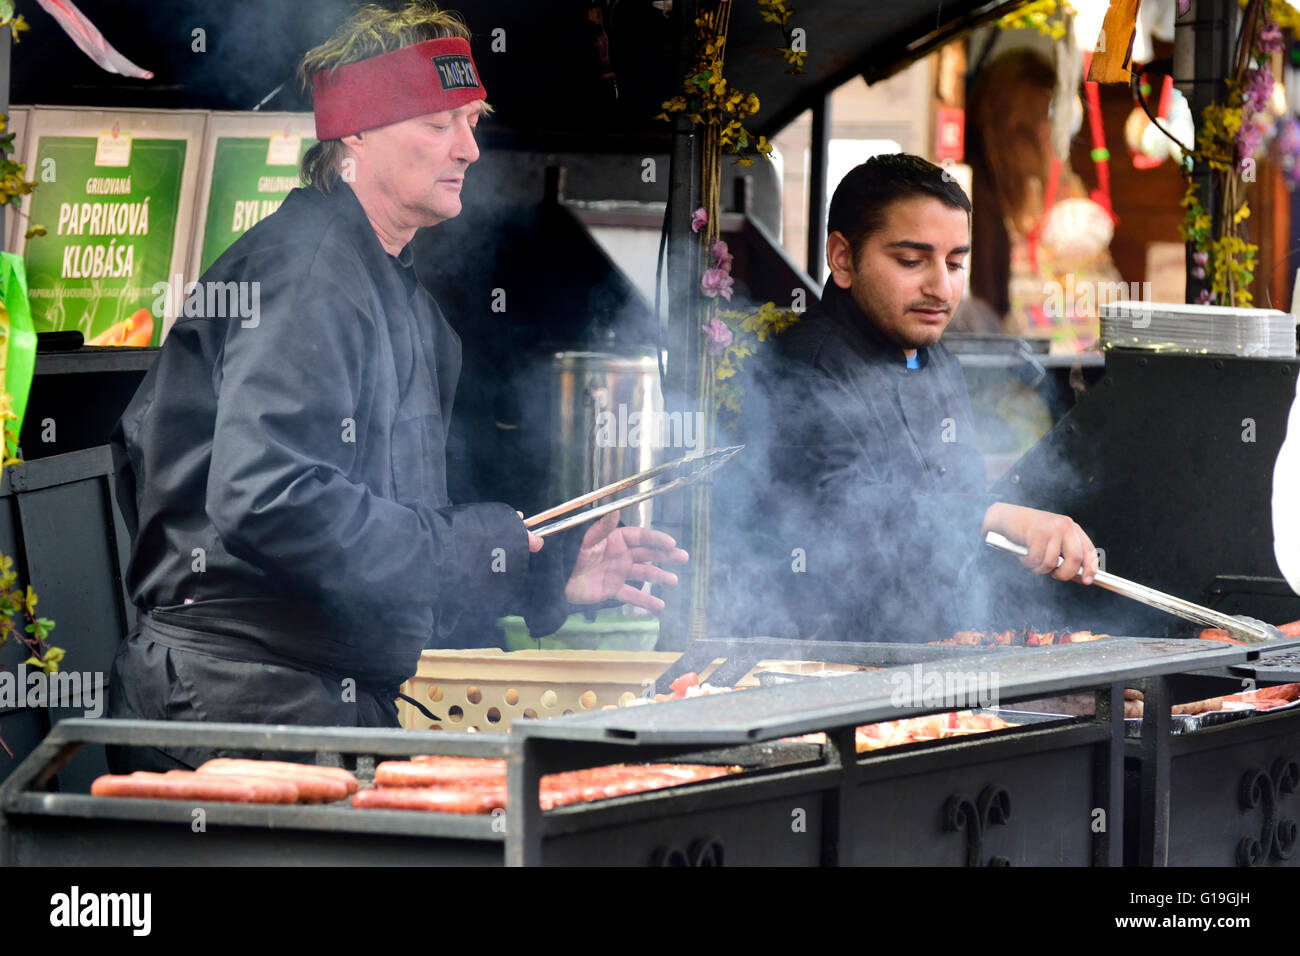 Prague, Czech Republic. Easter Market in Old Town Square, 2016. People cooking sausages outside Stock Photo